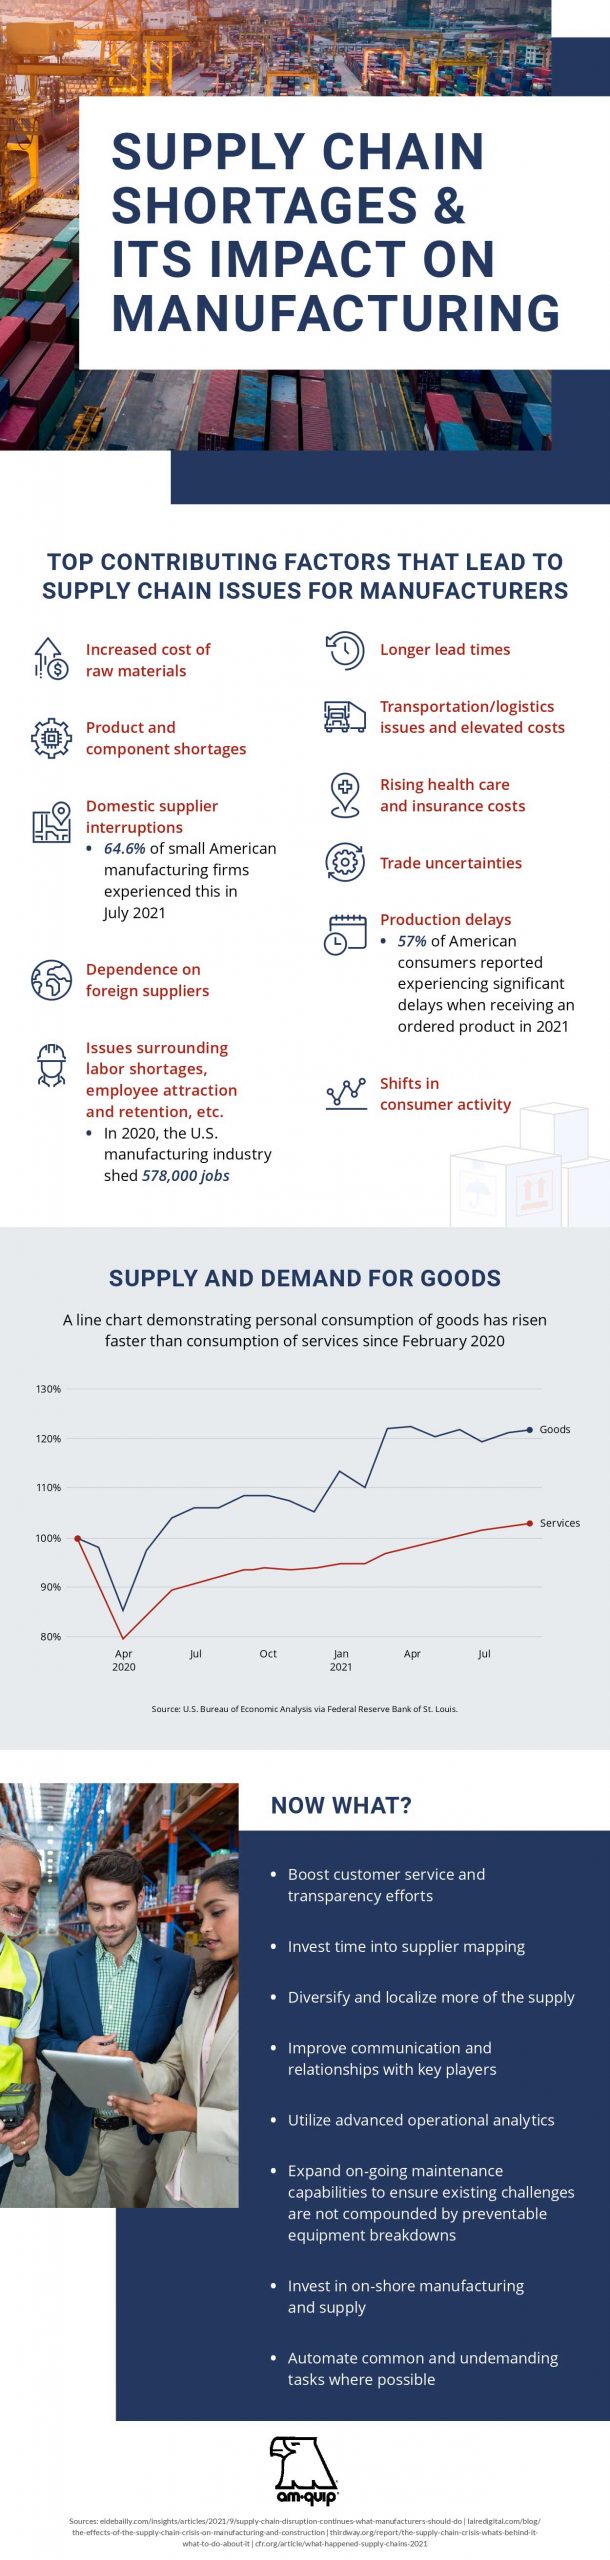 american equipment supply chain shortages infographic